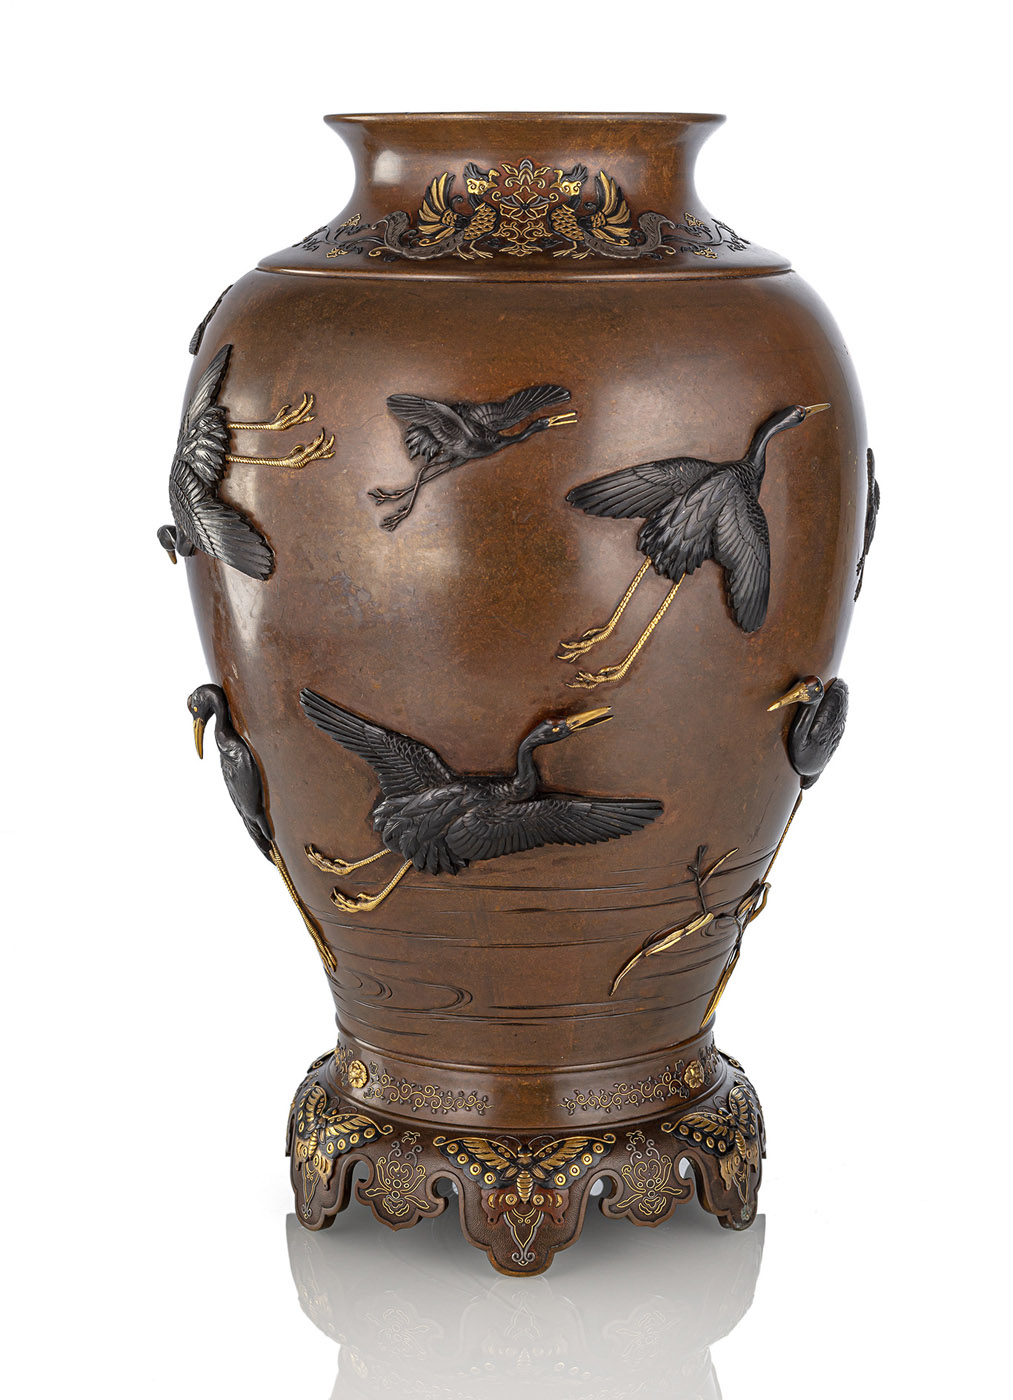 A FINE AND VERY RARE MIYAO VASE WITH SEVENTEEN CRANES - Image 3 of 7